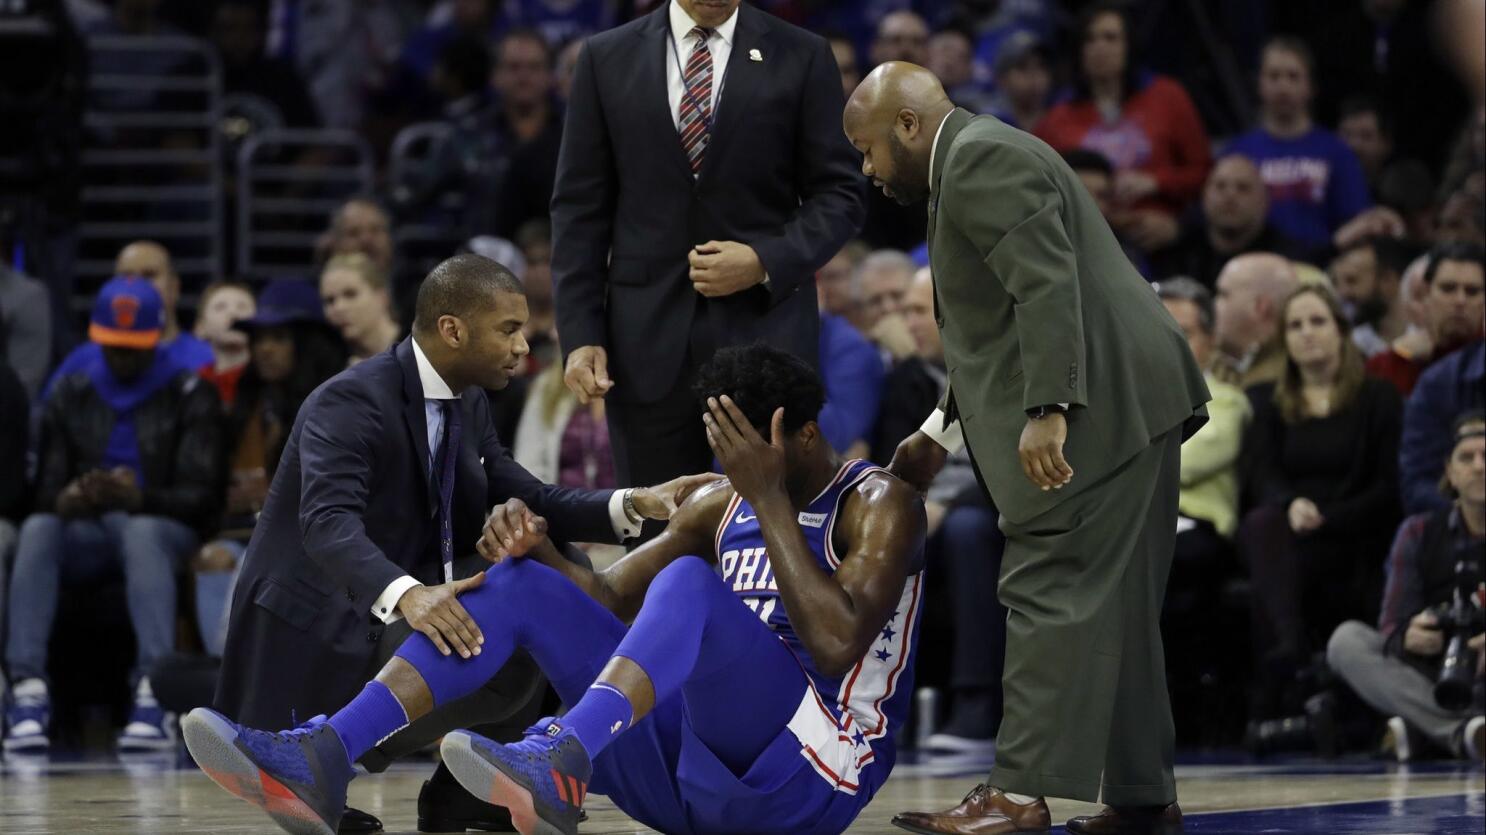 Why Do the Philadelphia 76ers Have a Snake on Their Court?